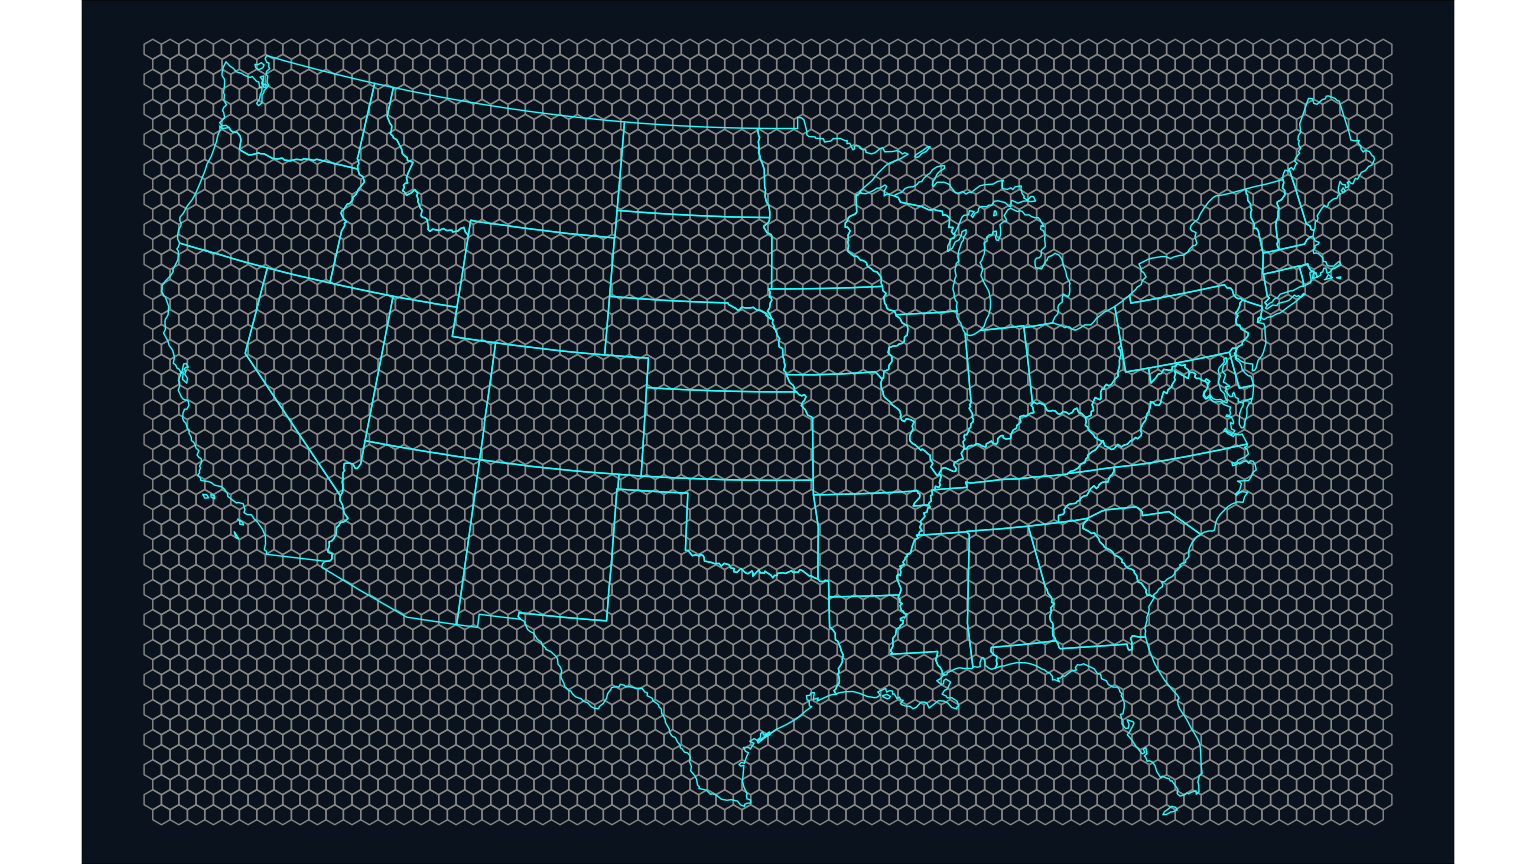 A map of the contiguous United States with the states each outline in cyan. Overlaying the states is a hexagonal grid in light grey. The hexagons are sized such that Iowa is approximately 7 hexagons wide and 5 hexagons tall.